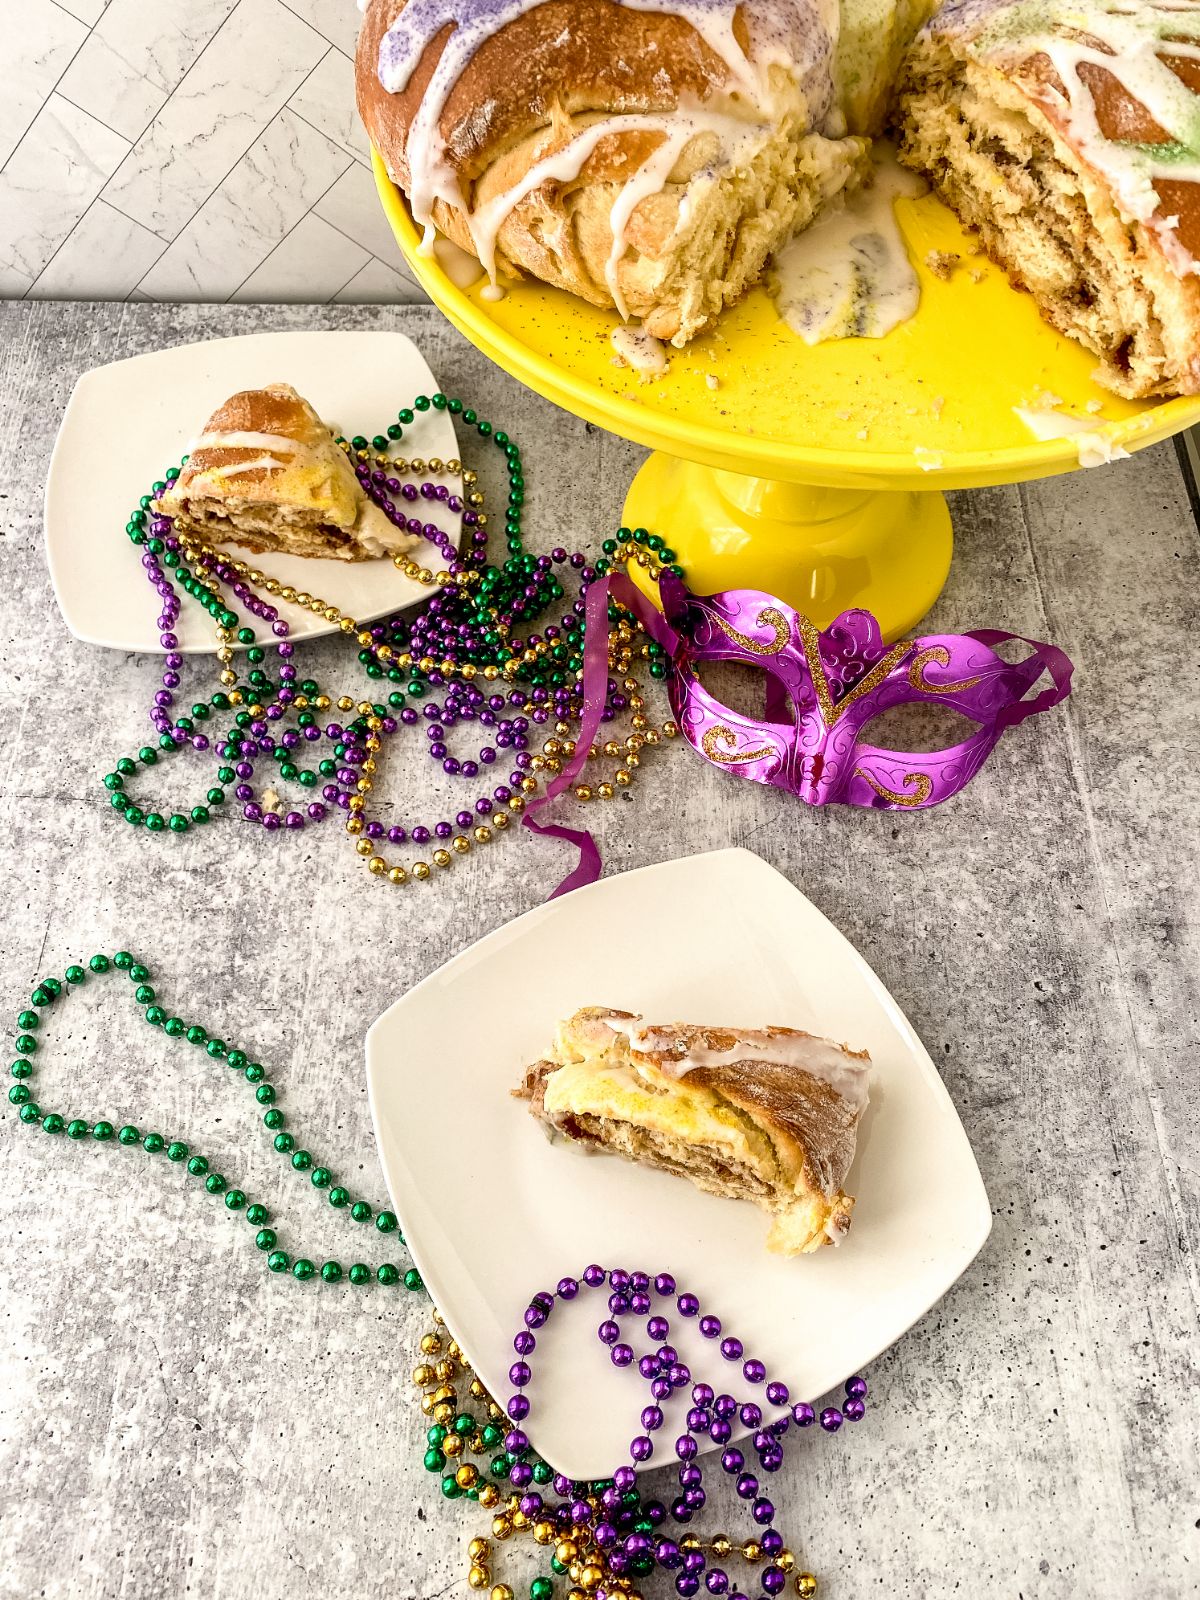 two plates of cake in front of yellow cake stand holding king cake